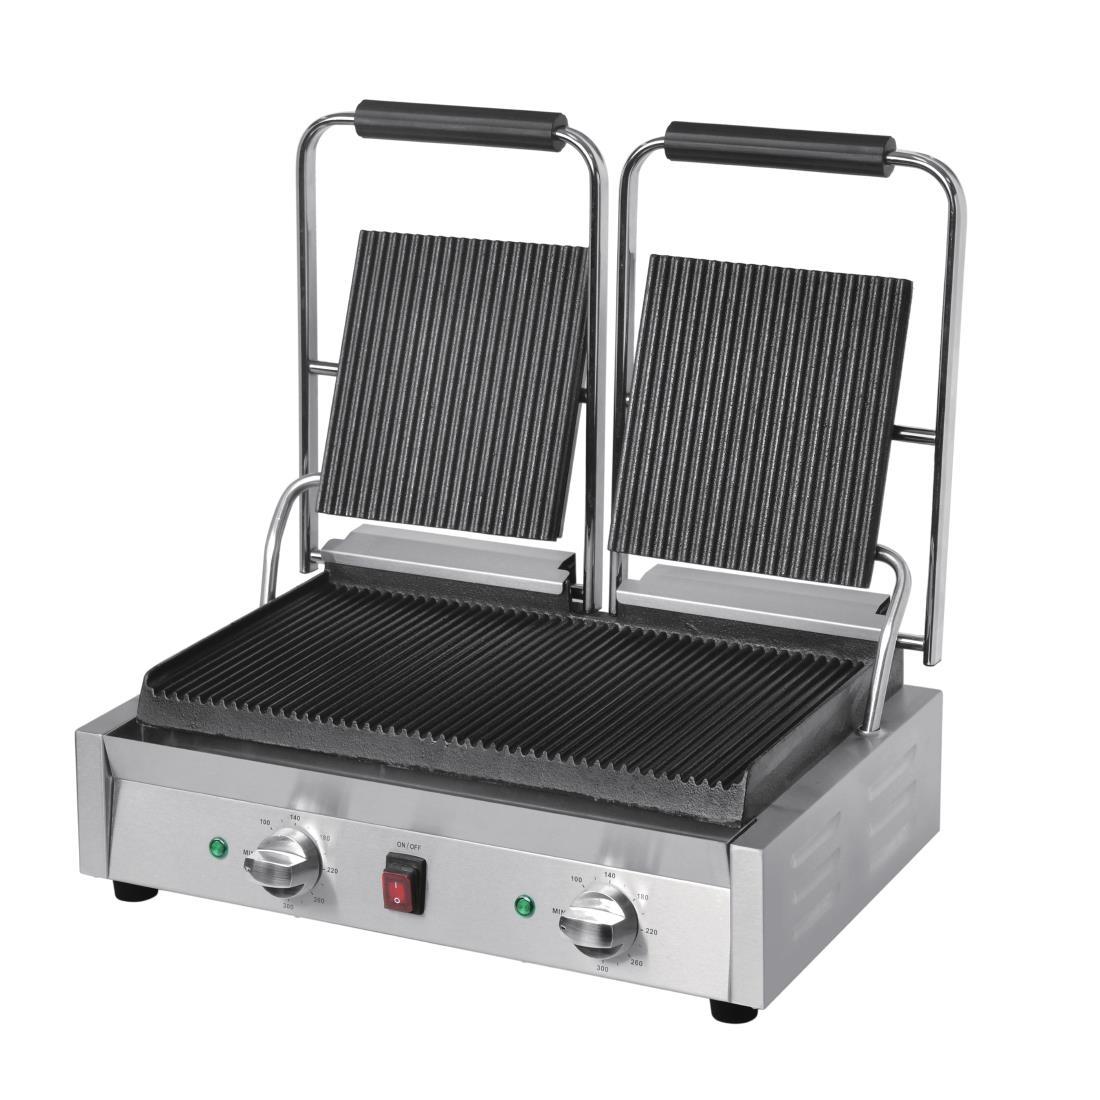 Buffalo Bistro Double Ribbed Contact Grill - DY994  - 2